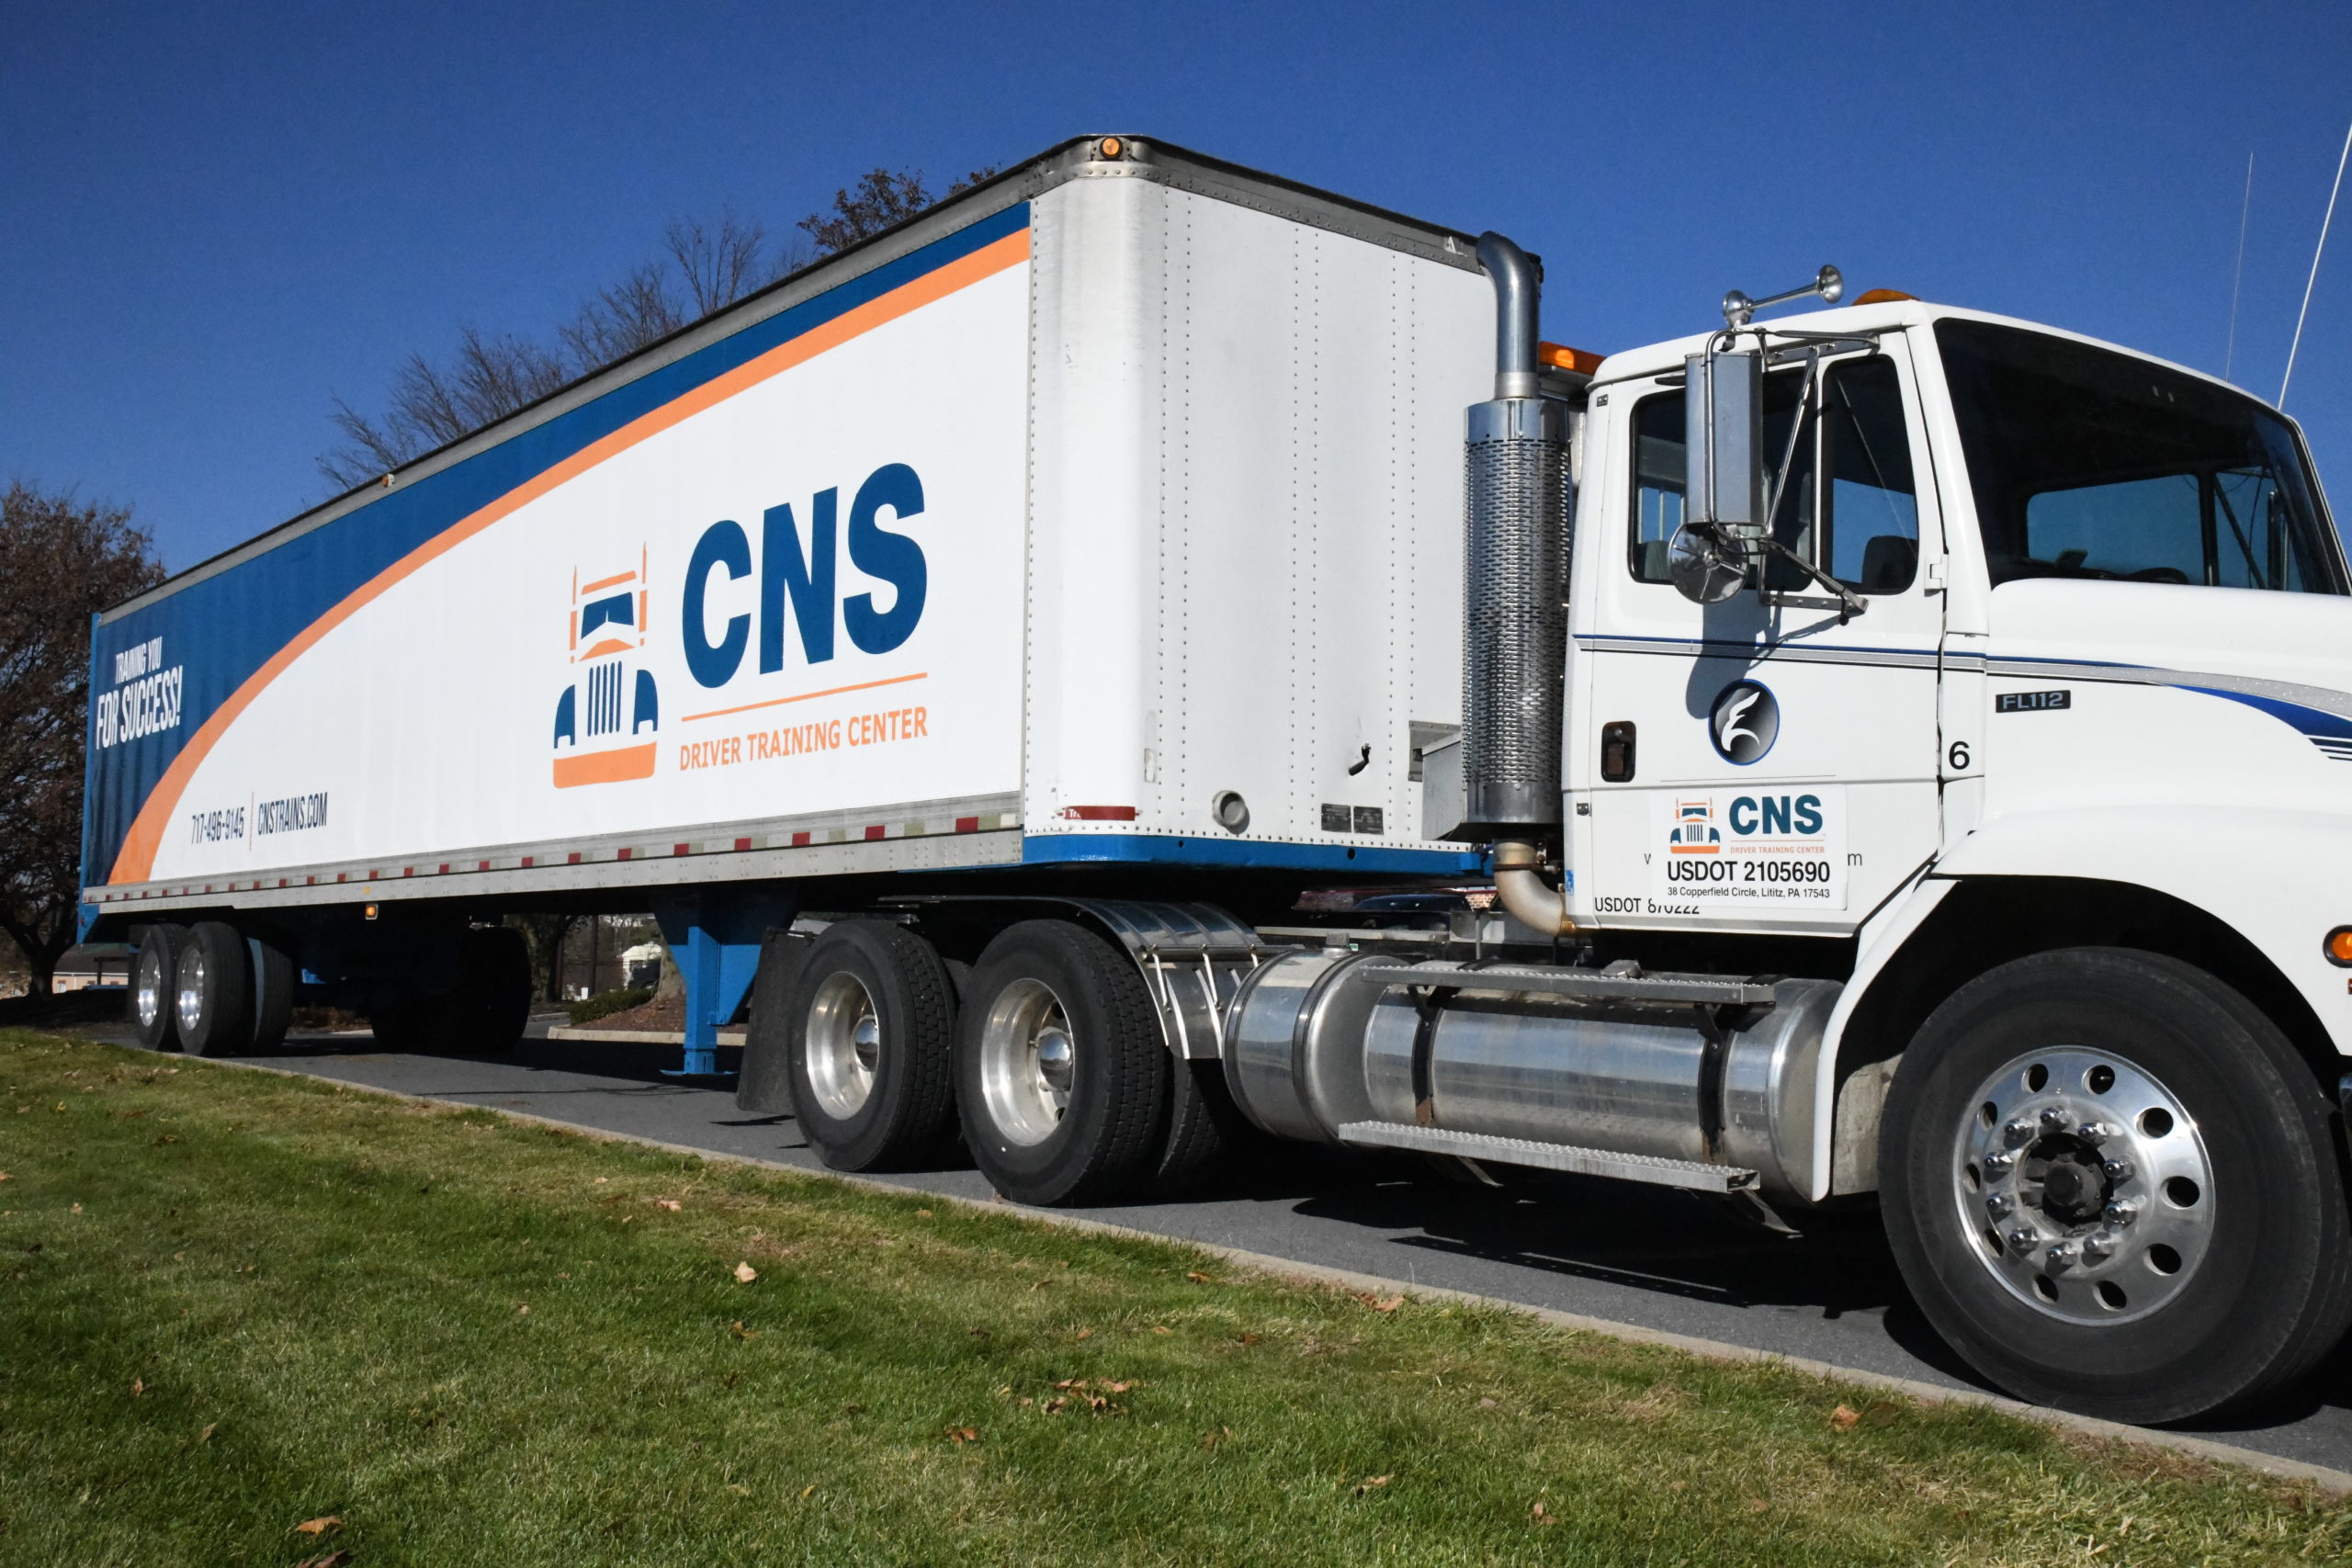 3rd Party CDL Testing can reduce persisting delays